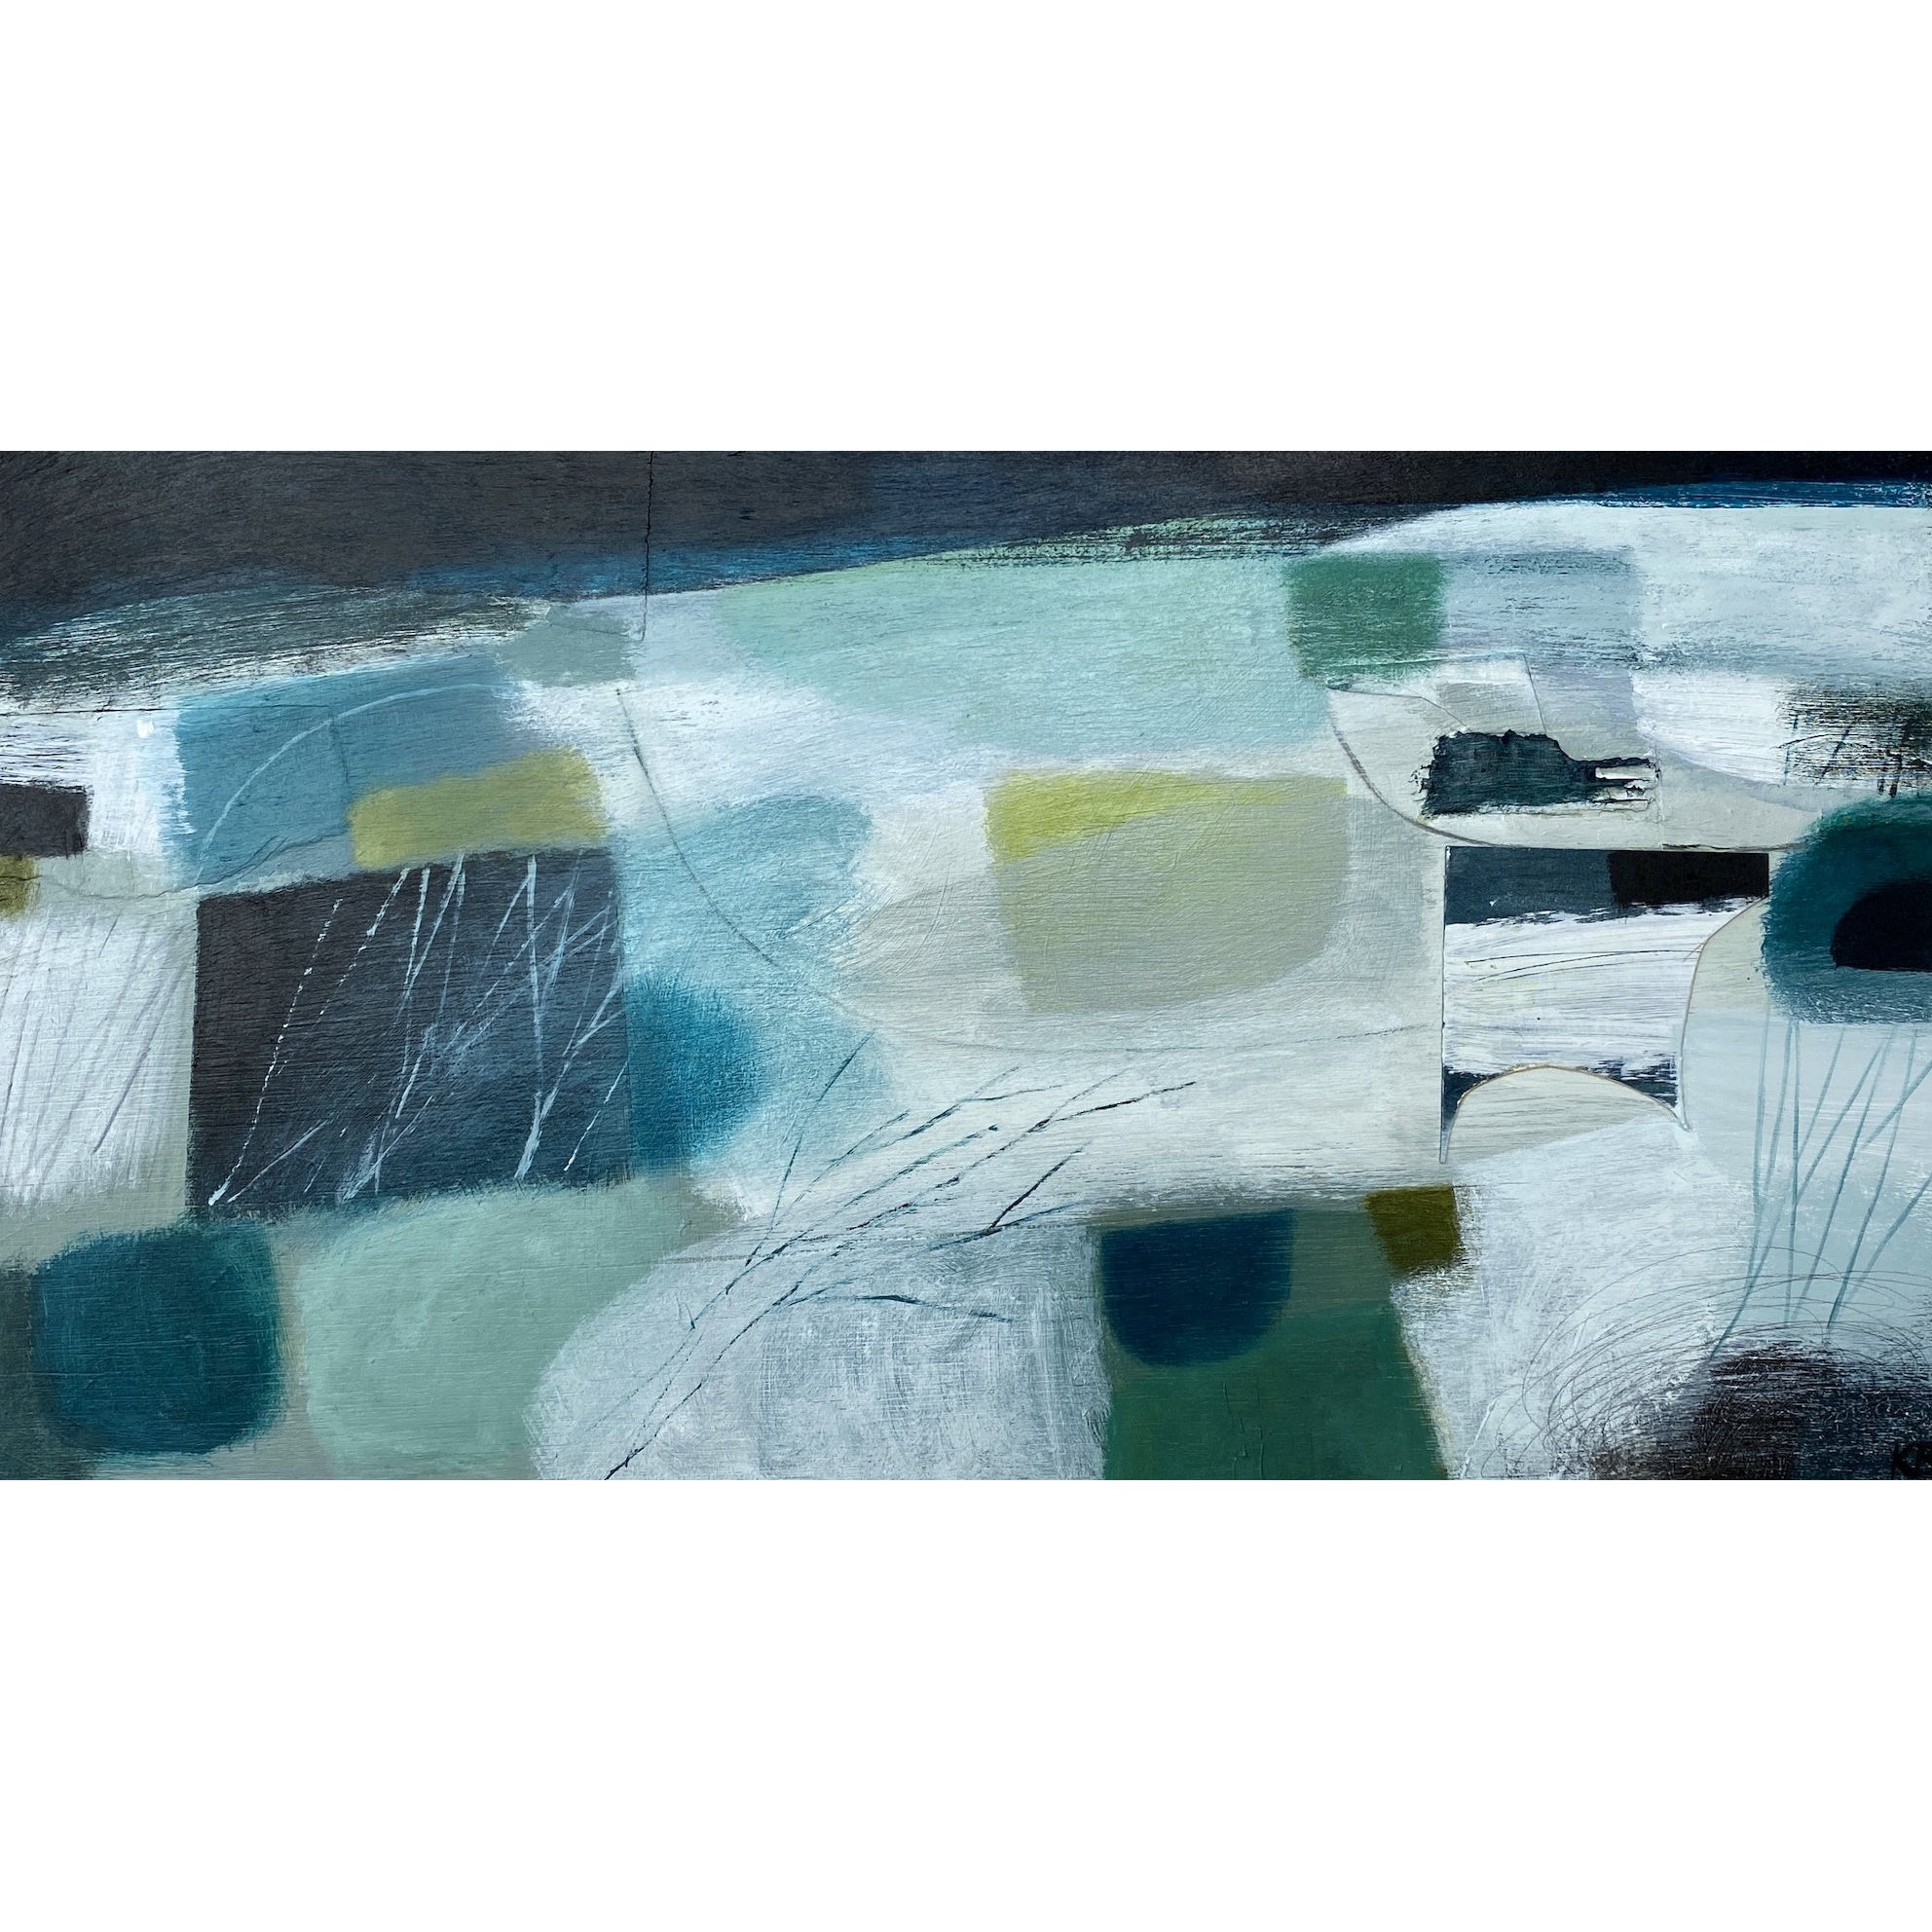 Land Colours 3, mixed media by Karen Birchwood, available from Padstow Gallery, Cornwall